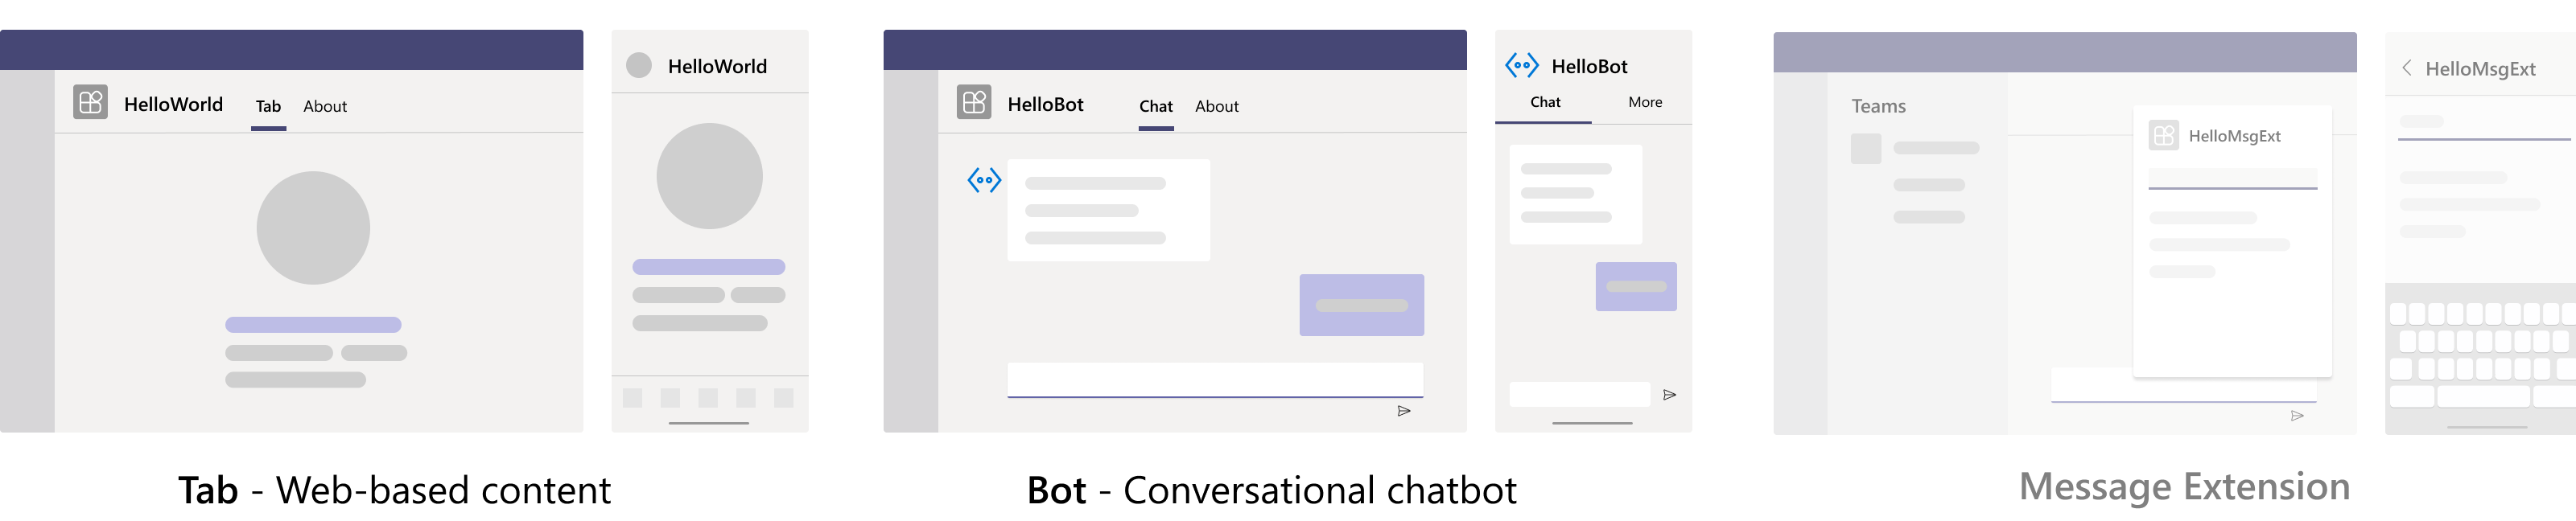 Screenshot of the Blazor app displaying the tab, Bot, and Message Extension output after after the step-by-step Blazor guide is successfully completed.